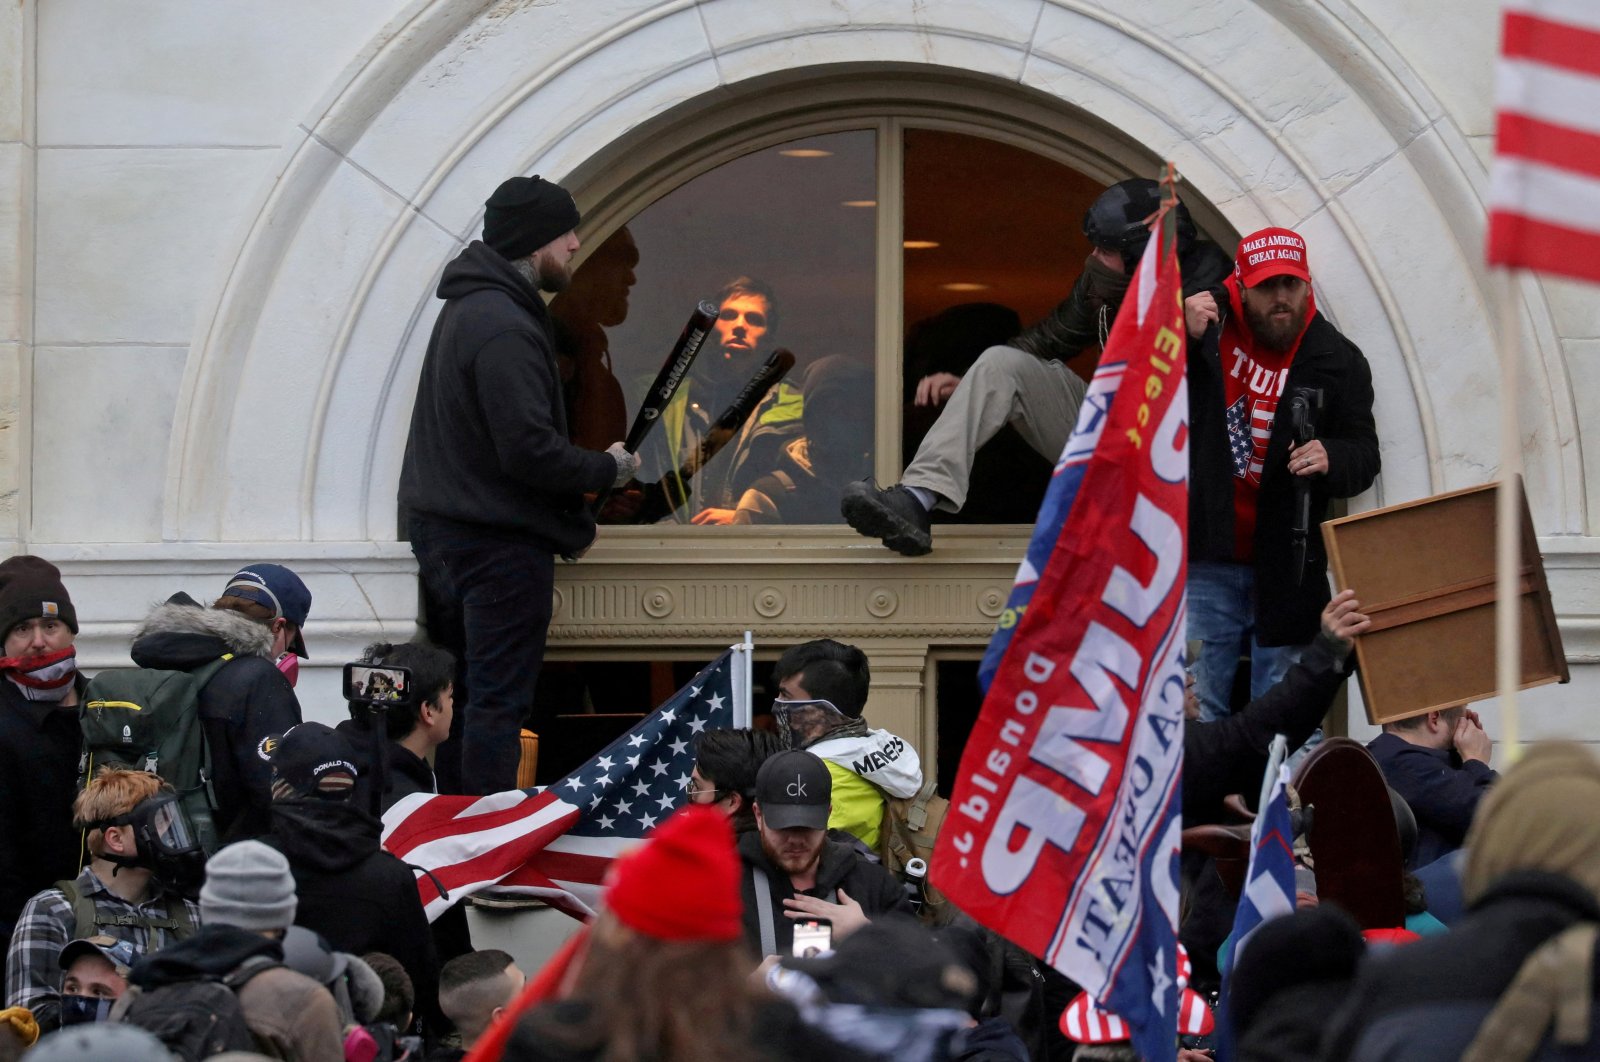 A mob of supporters of then-U.S. President Donald Trump climb through a window they broke as they storm the U.S. Capitol Building. Washington, U.S., Jan. 6, 2021. (Reuters Photo)